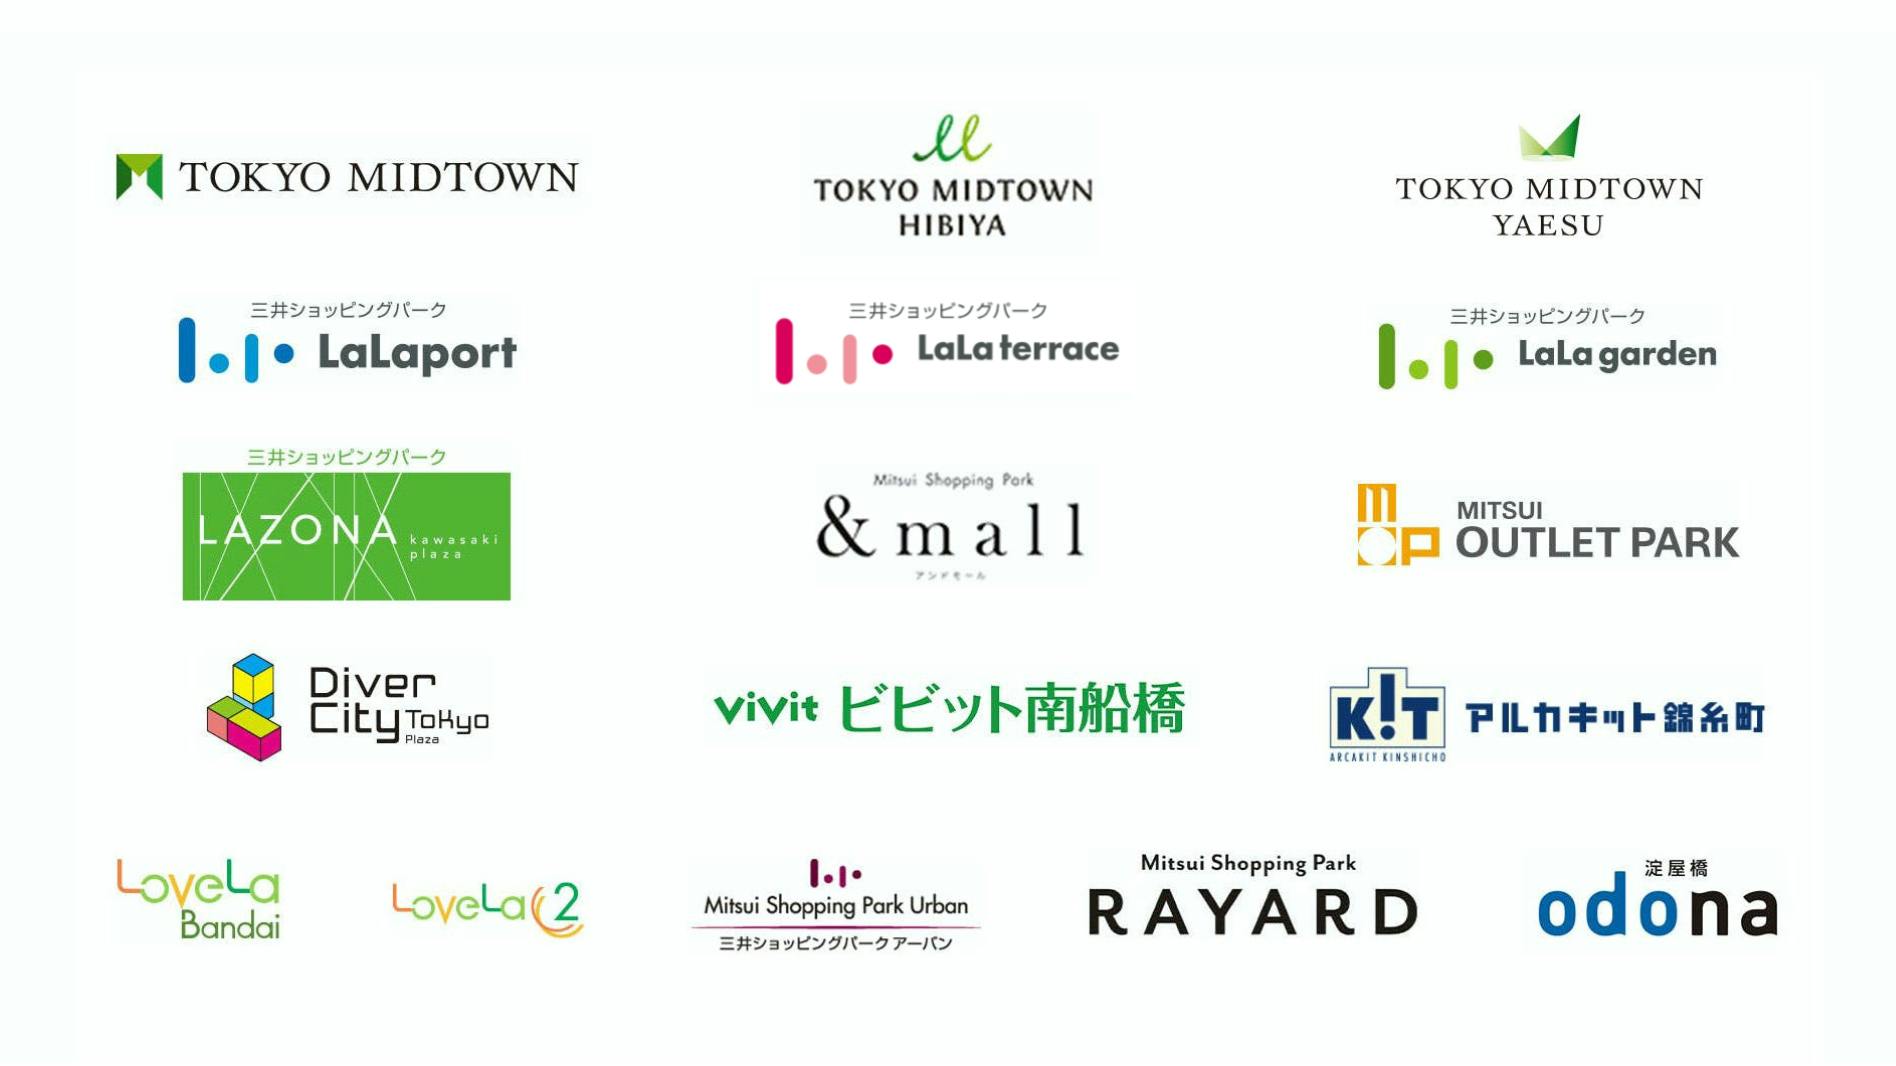 TOKYO MIDTOWN、TOKYO MIDTOWN HIBIYA、TOKYO MIDTOWN YAESU、三井ショッピングパークLalaport、三井ショッピングパークLala garden、三井ショッピングパークLala terrace MUSASHIKOSUGI、三井ショッピングパークLAZONA、Mitsui Shopping Park &mall、MITSUI OUTLET PARK、Diver City Tokyo Plaza、アルカキット錦糸町、LoveLa Bandai、LoveLa2、Mitsui Shopping Park Urban 三井ショッピングパークアーバン、Mitsui Shopping Park RAYARD、淀屋橋odona